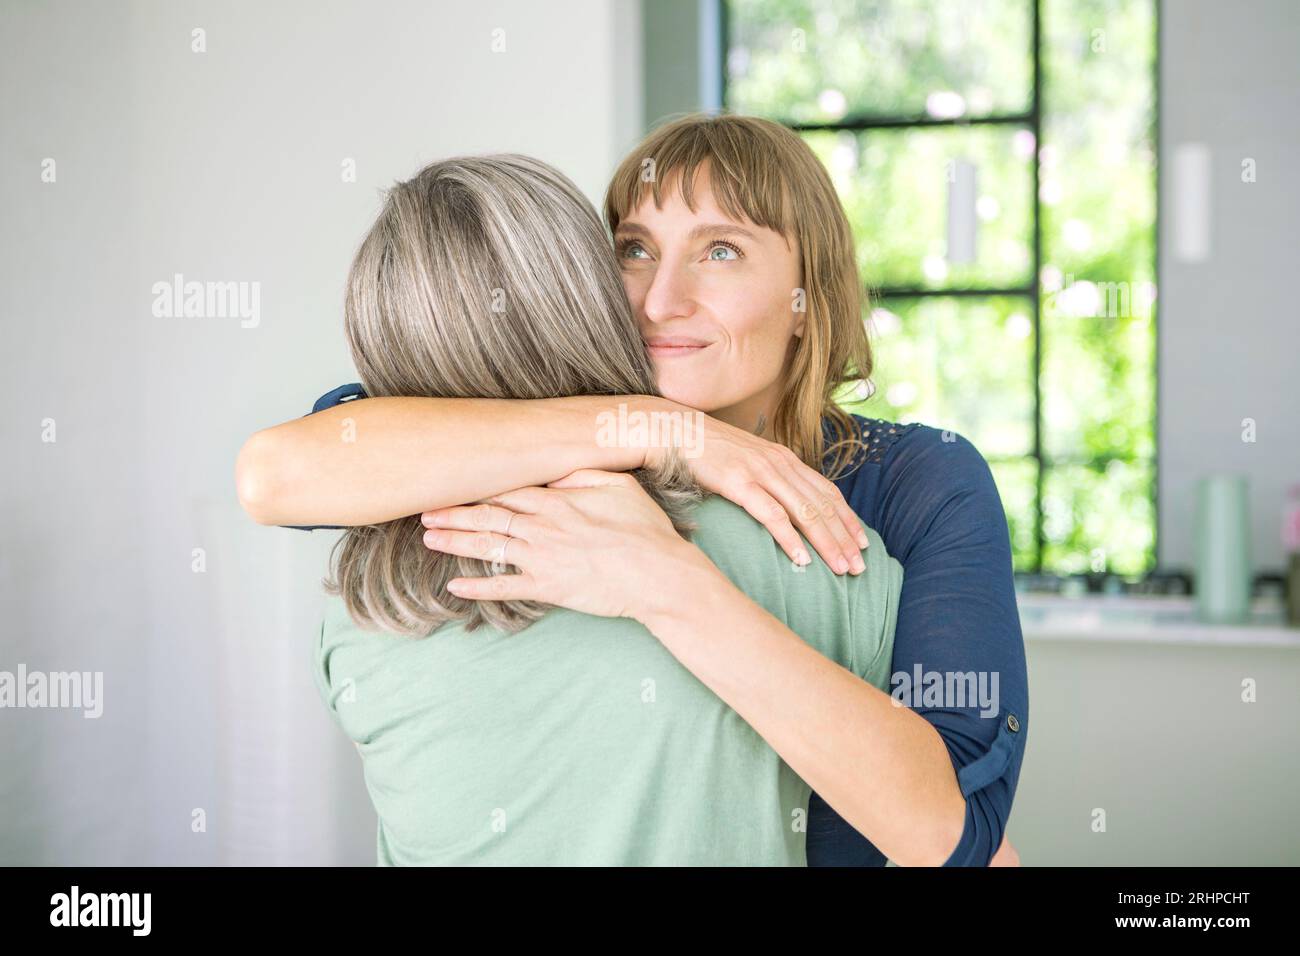 Mother and adult daughter Stock Photo